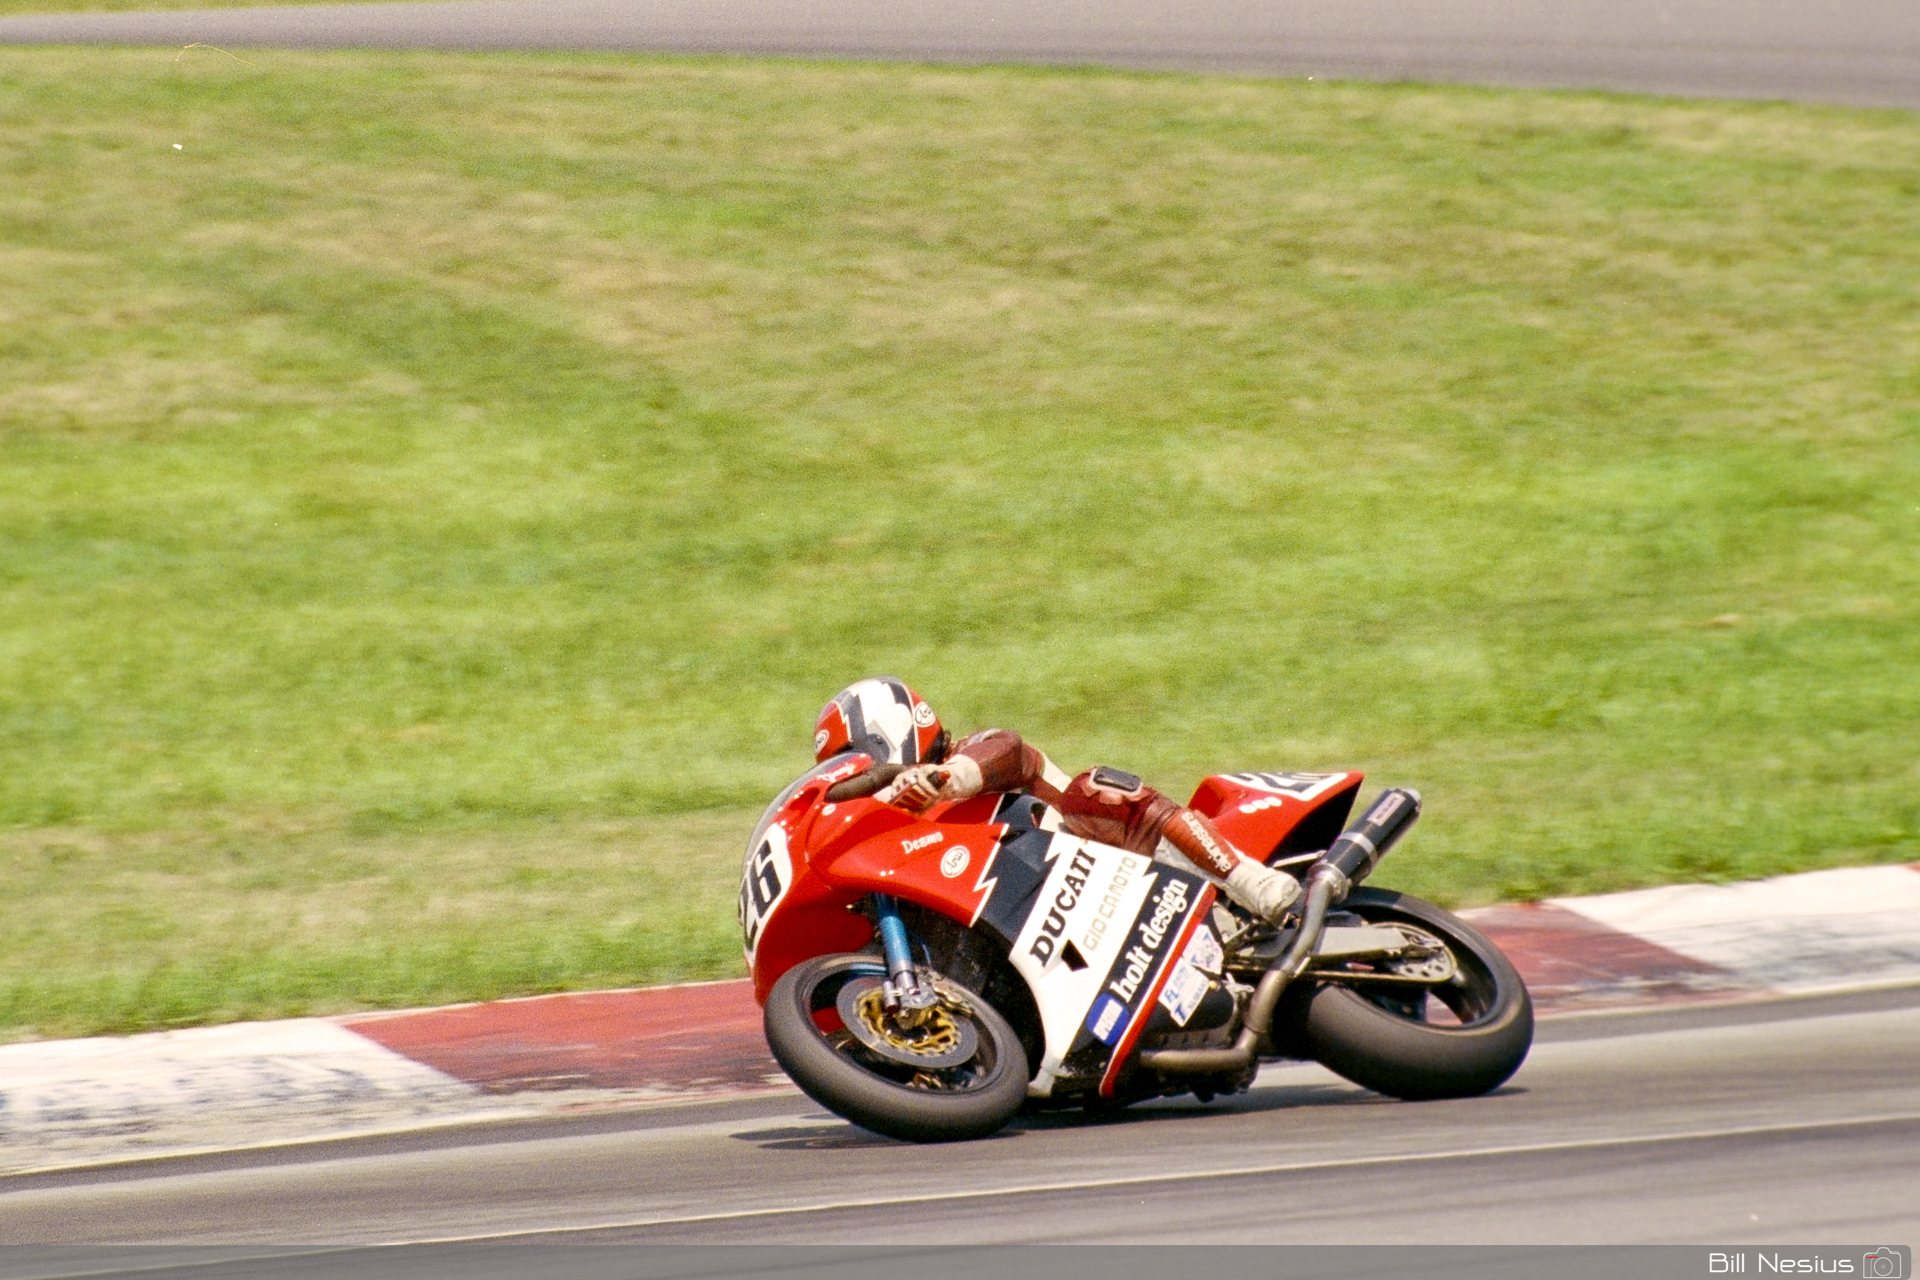 Jimmy Adamo on a the Number 26 Ducati 851 / FLM_7757 / 3